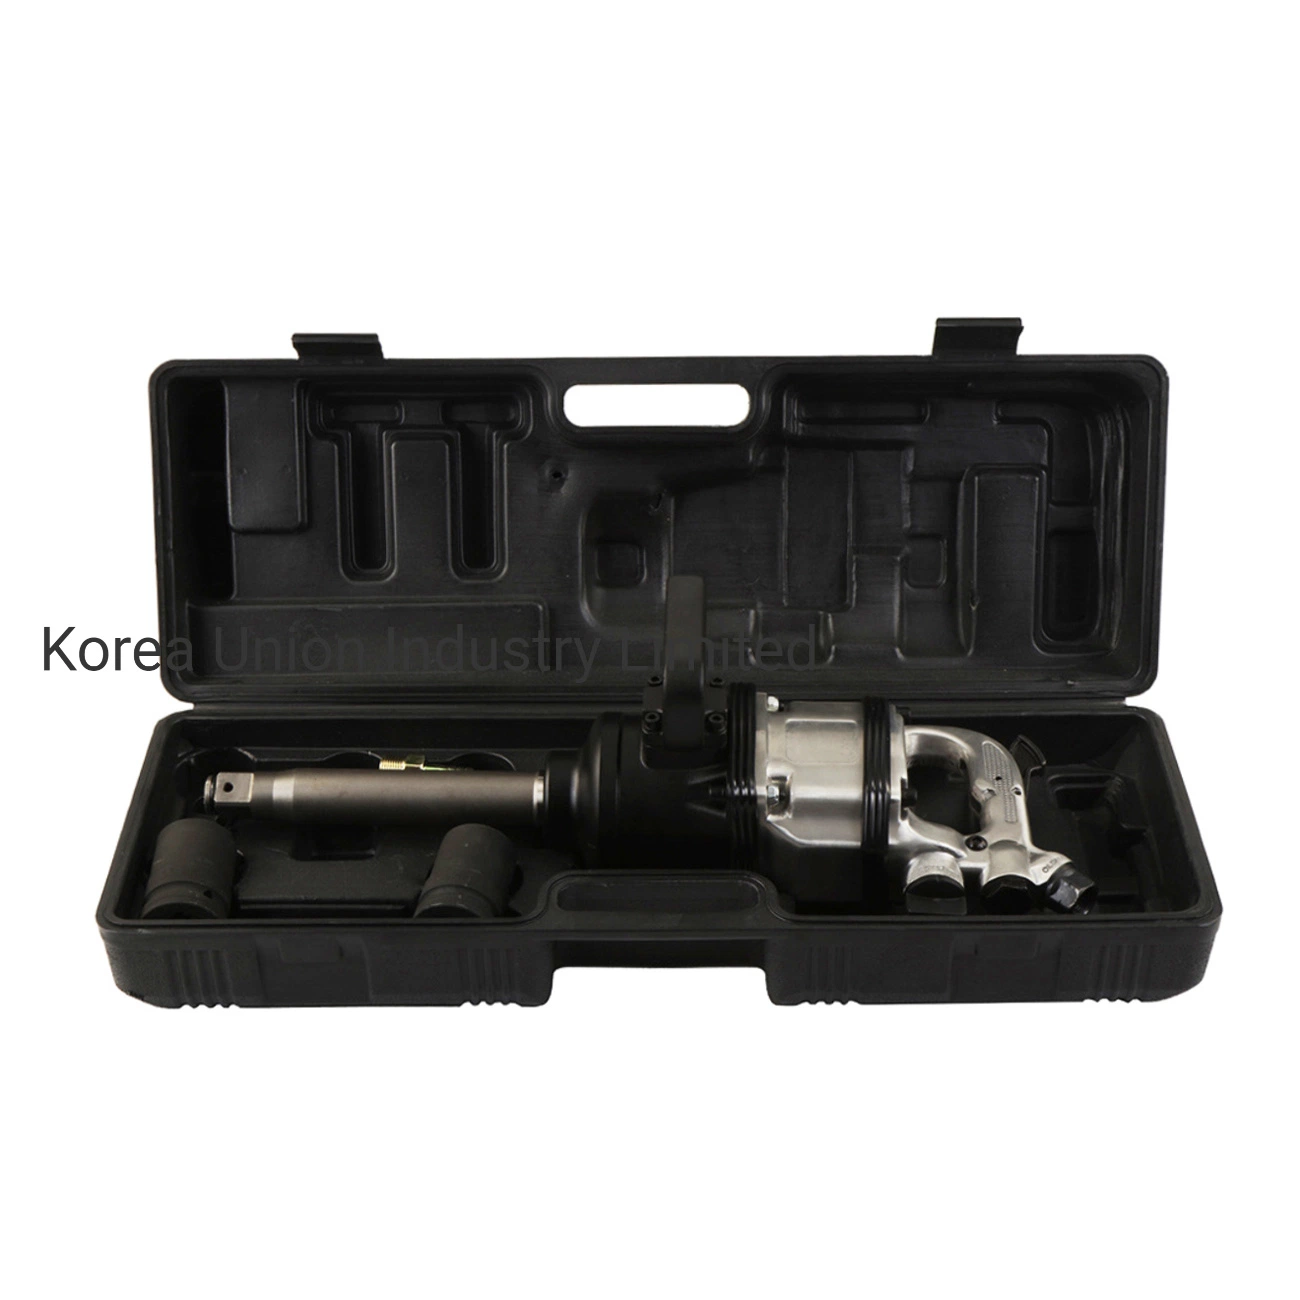 China Manufacture 1 Inch Truck Tire Air Pneumatic Power Impact Wrench